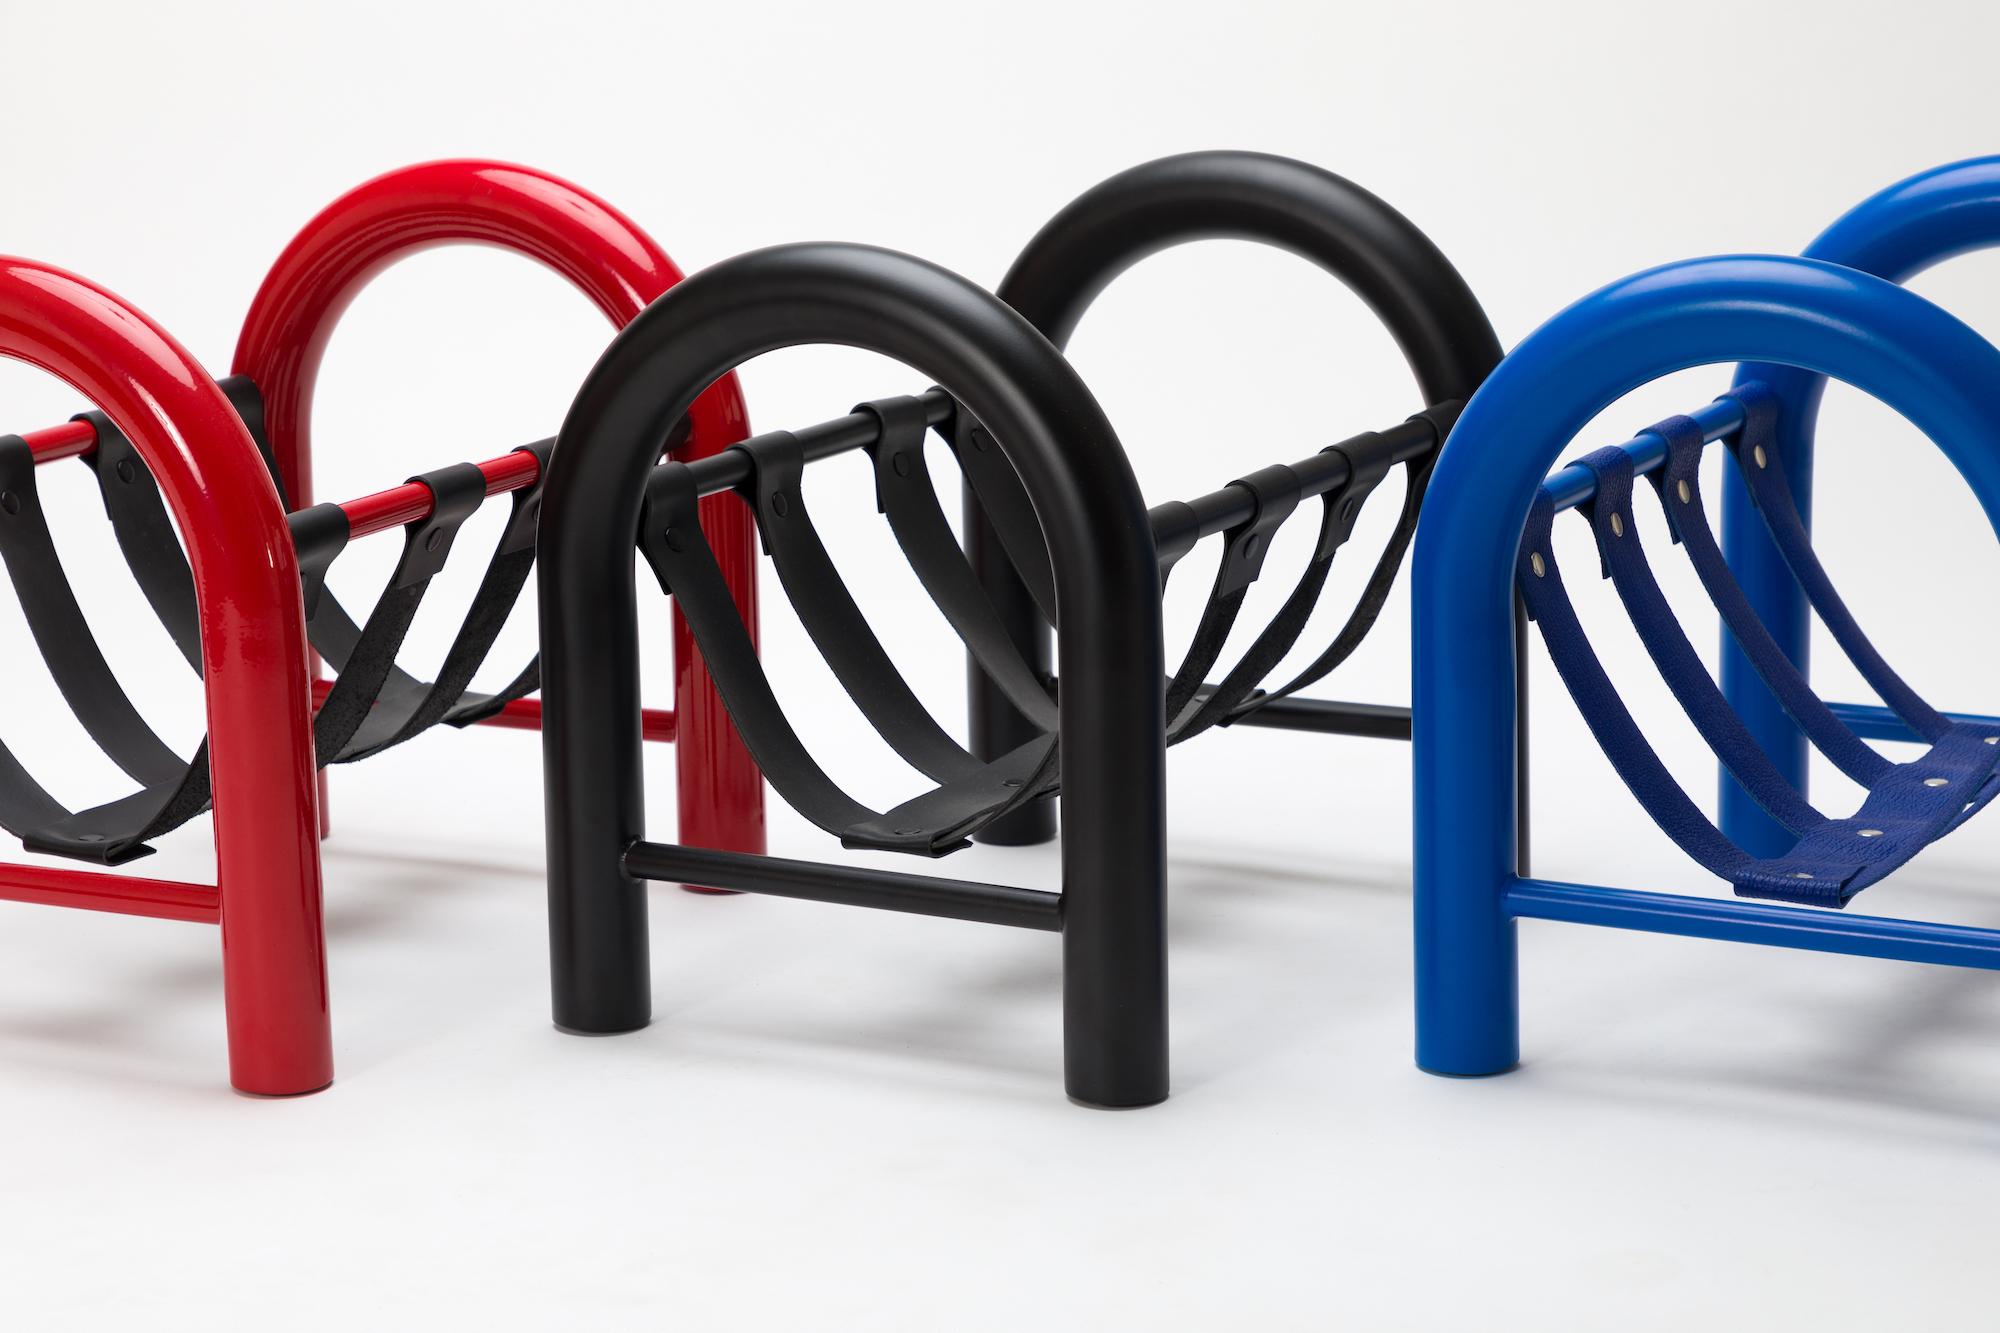 Powder-Coated Limited Edition Tubular Magazine Rack by Another Human, Blue